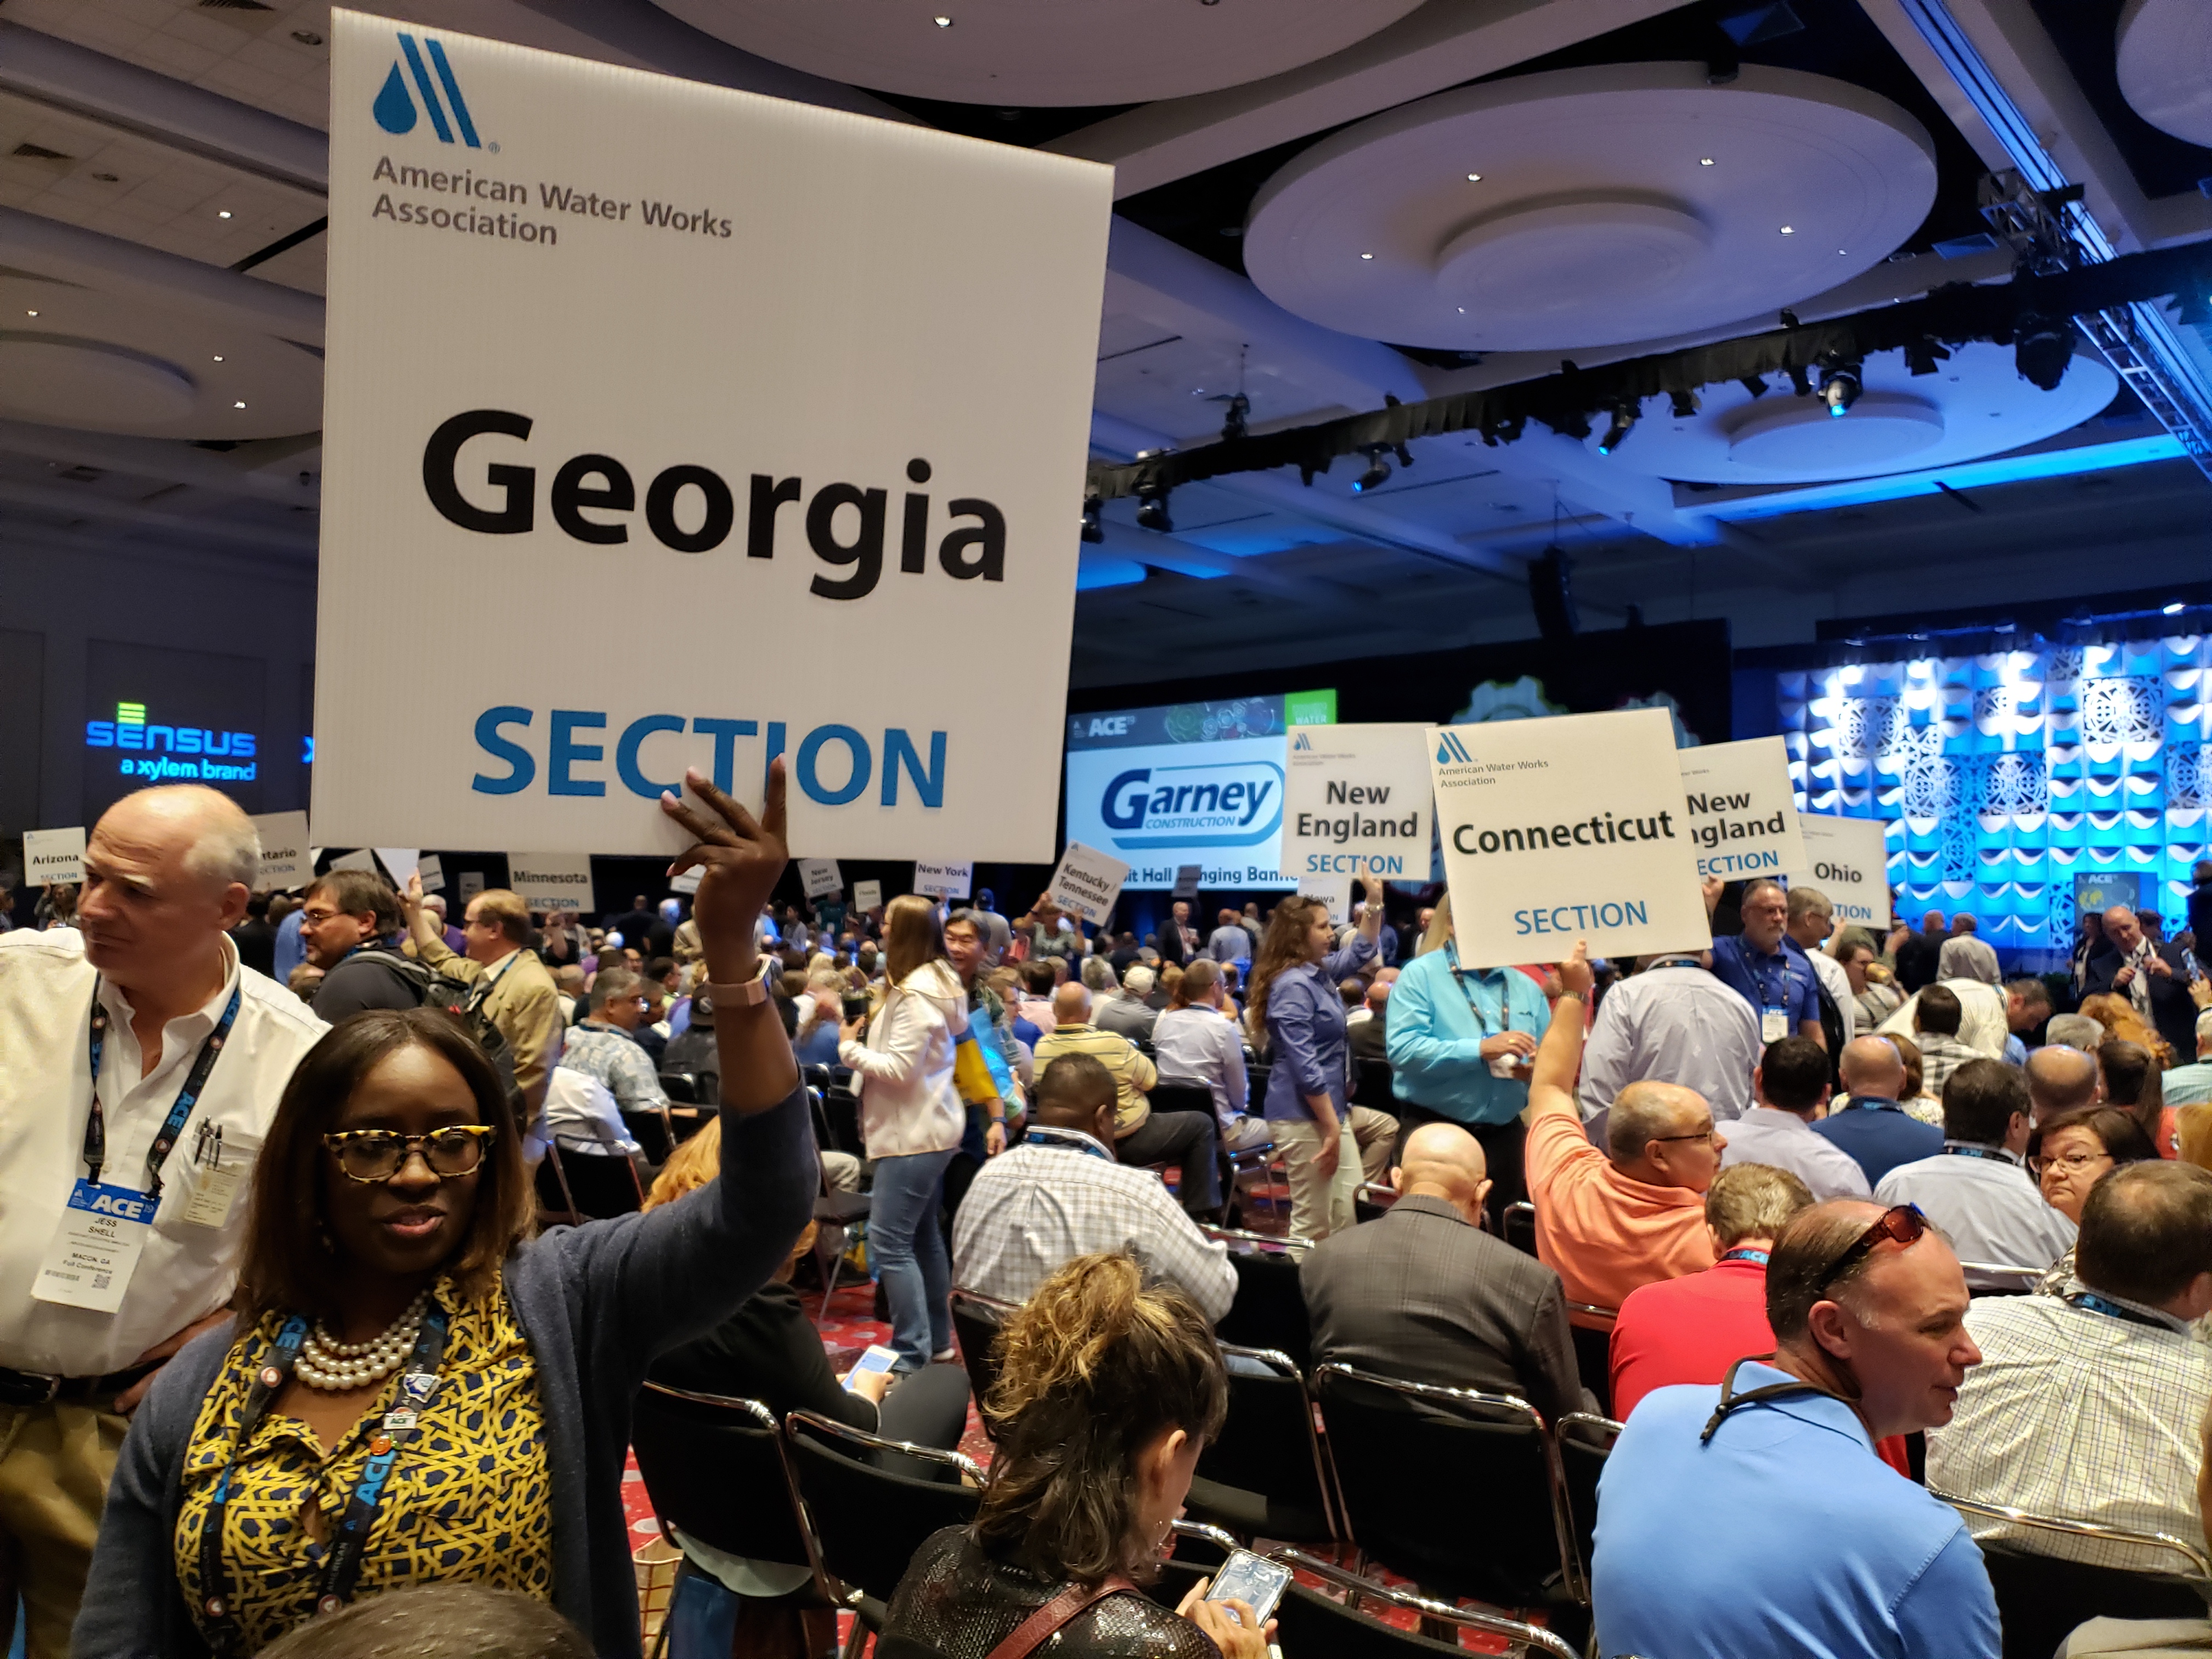 Signs for the Georgia, New England, Connecticut and Ohio sections of the American WAter Works Association can be seen in a crowded ballroom.